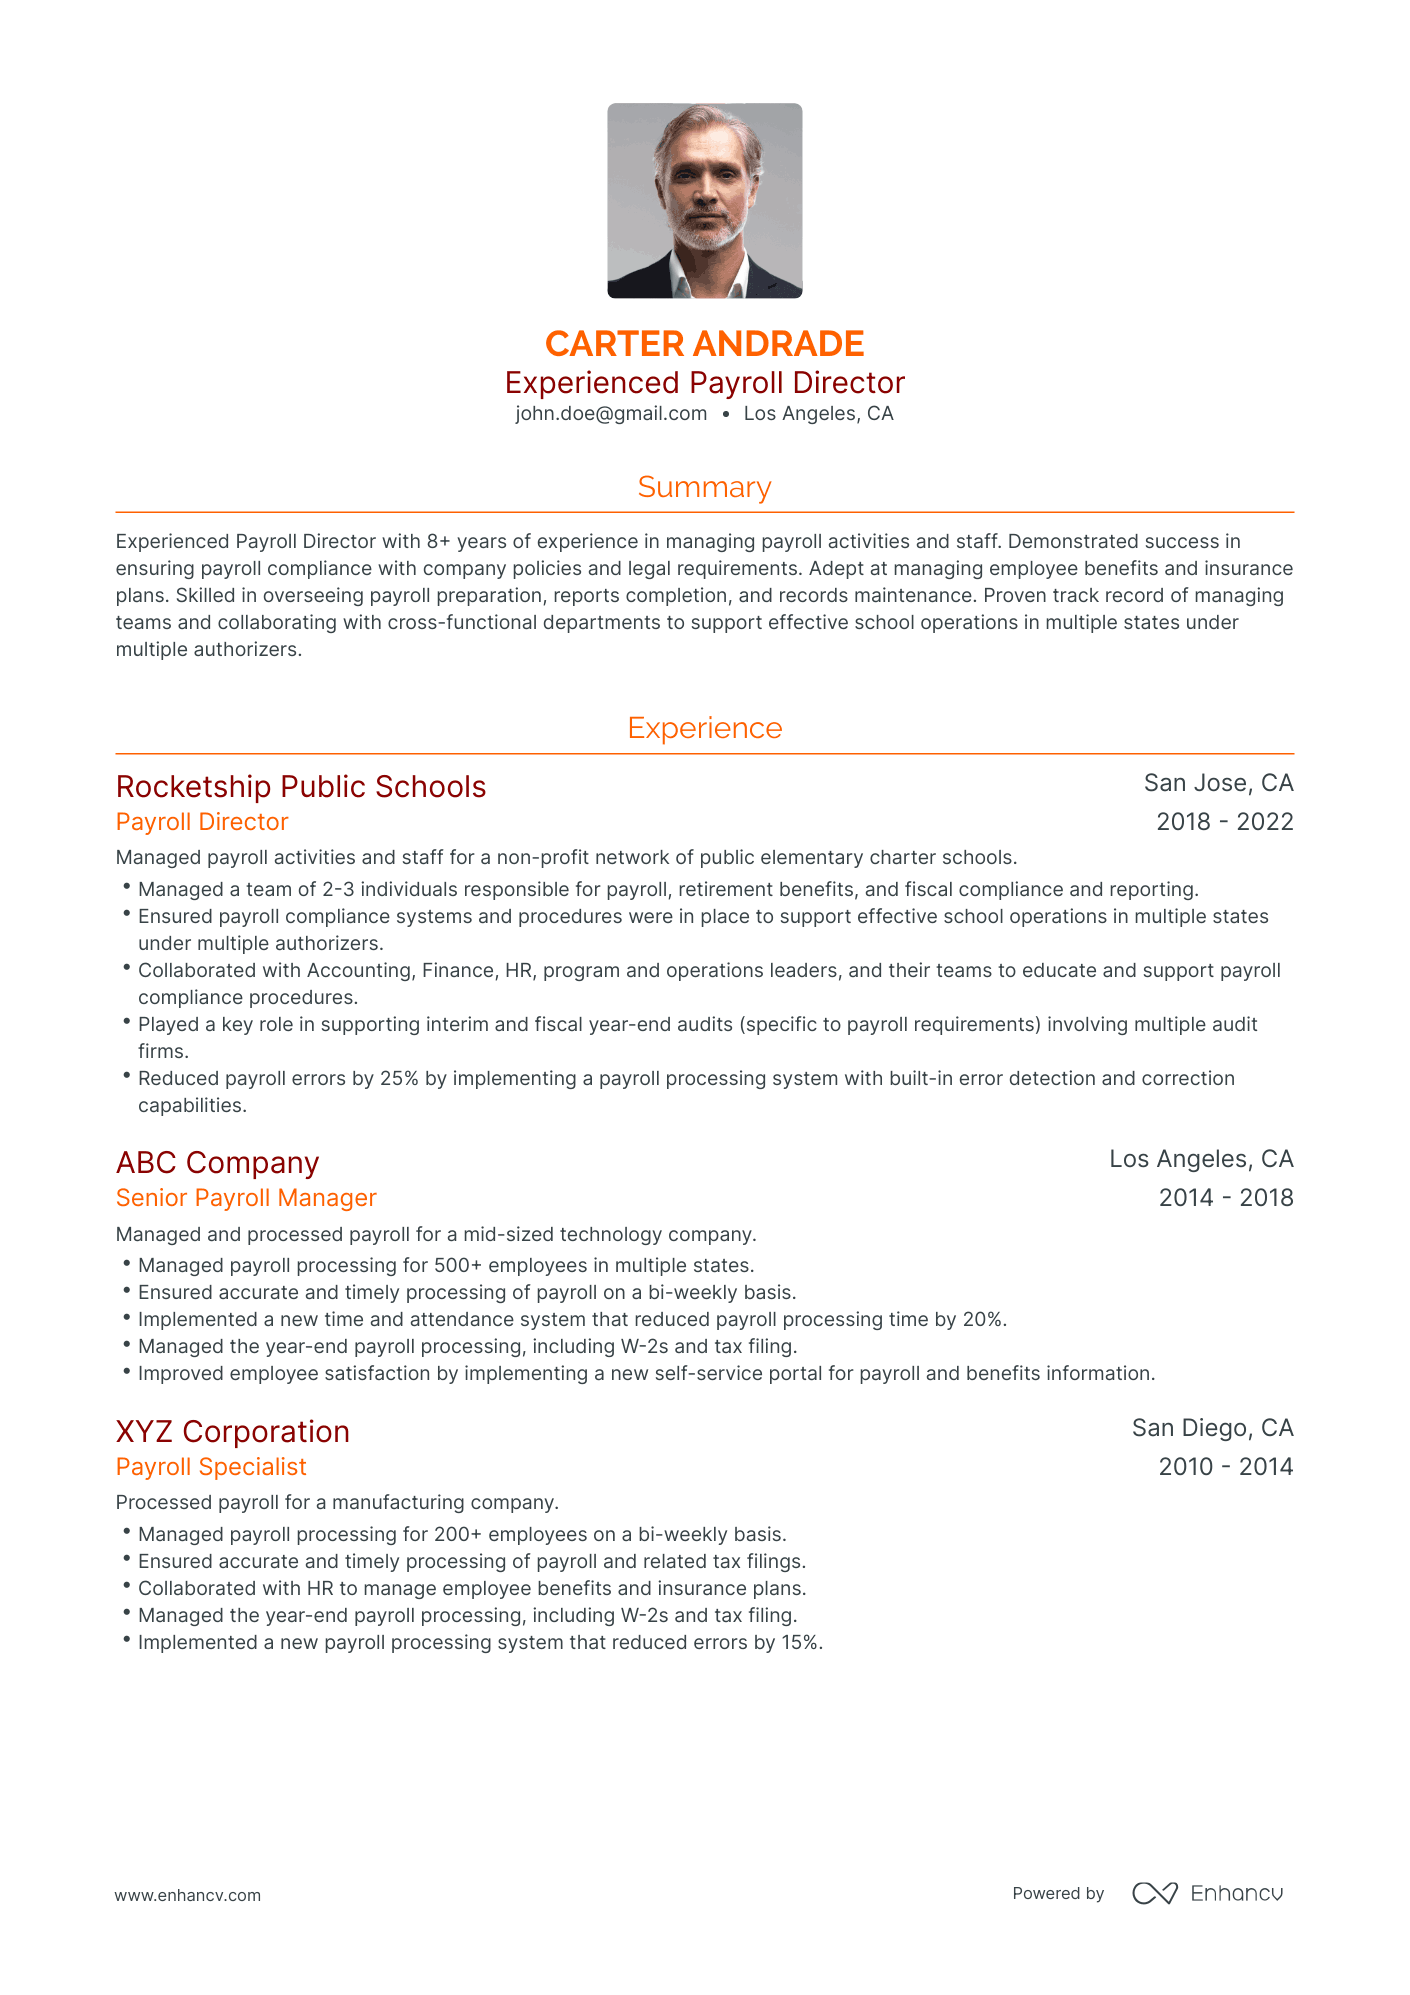 Traditional Payroll Director Resume Template